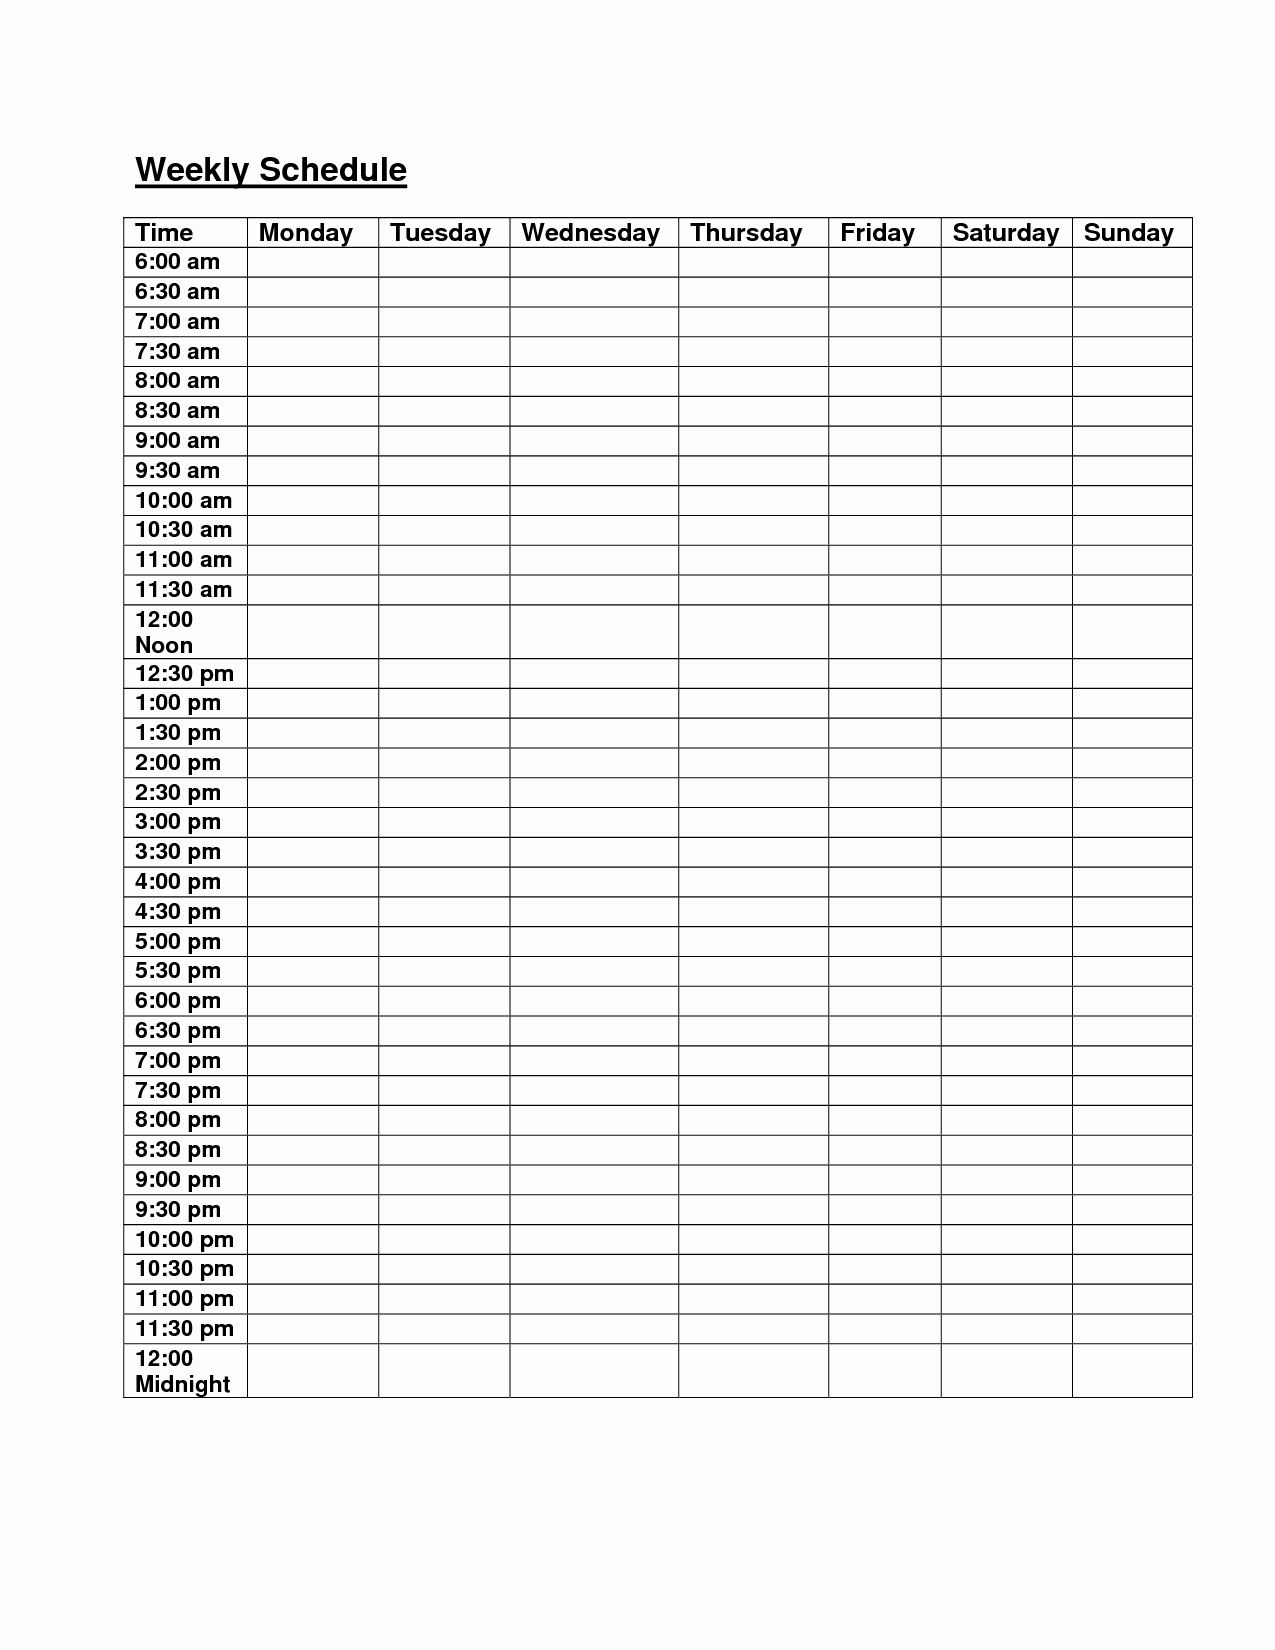 Weekly Schedule Template with Hours New 6am Midnight Hourly Weekly Schedule Planner